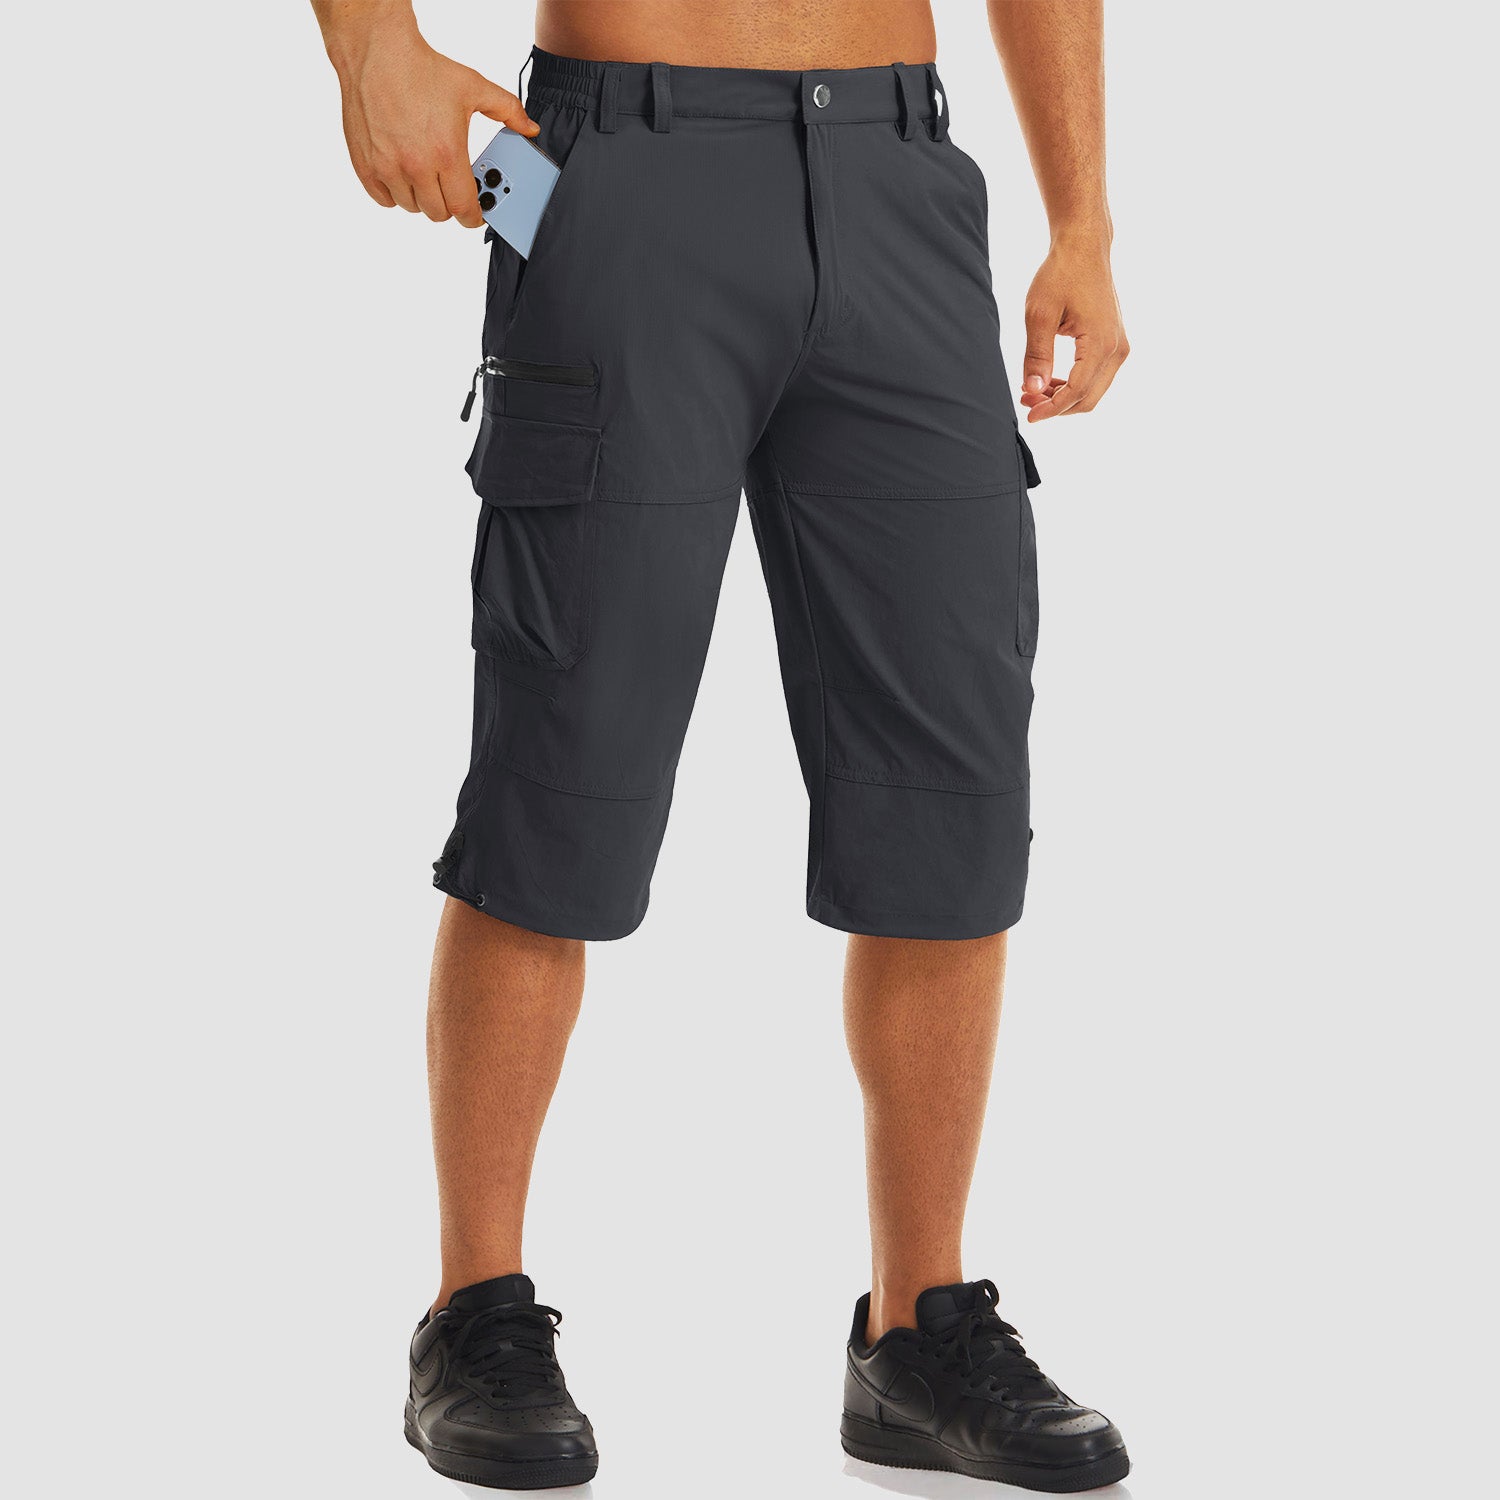 【Buy 4 Get the 4th Free！】Men's Workout Gym Shorts with 7 Pockets Quick Dry 3/4 Capri